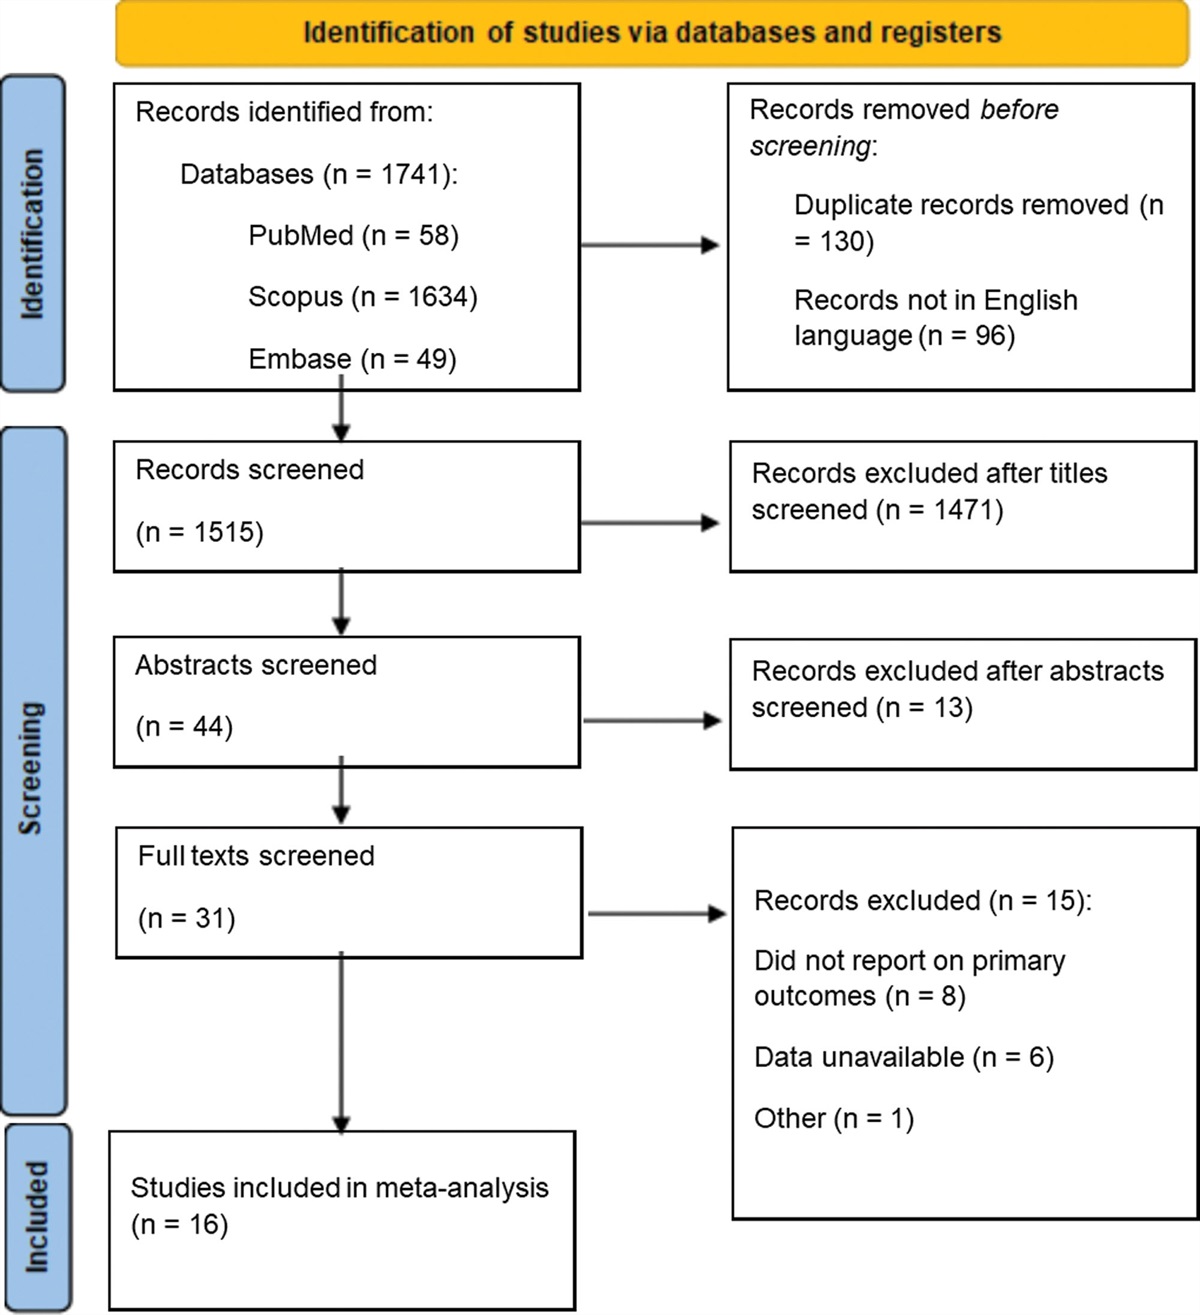 Cardiovascular parameters following parathyroidectomy in primary hyperparathyroidism: a systematic review and meta-analysis